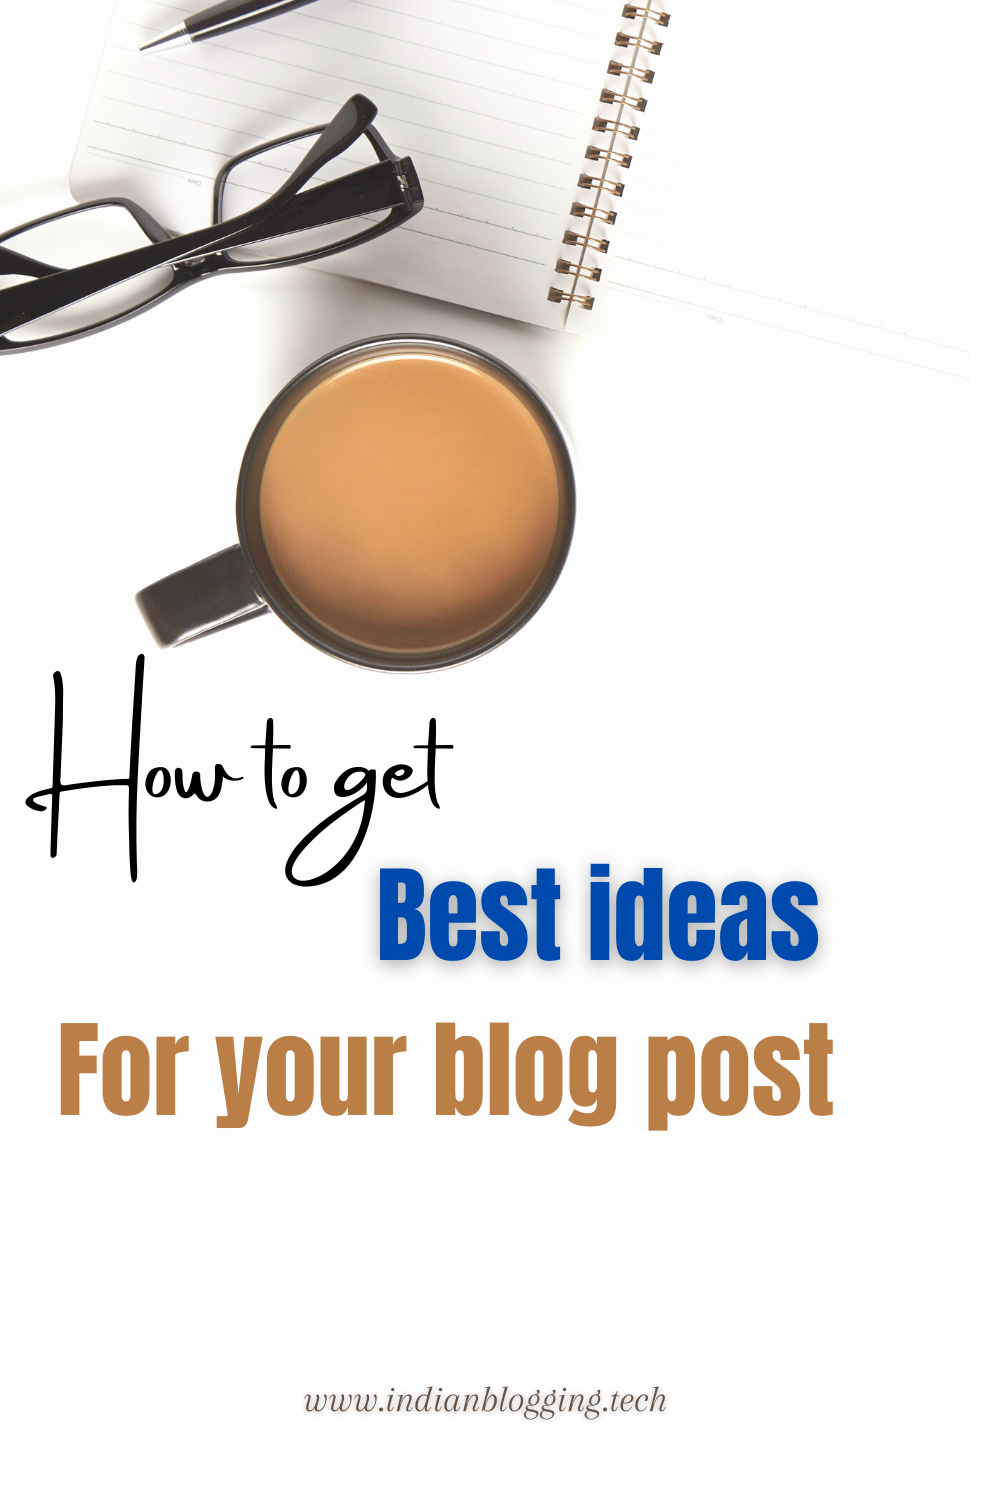 Get a lot of content ideas in one click - indian blogging